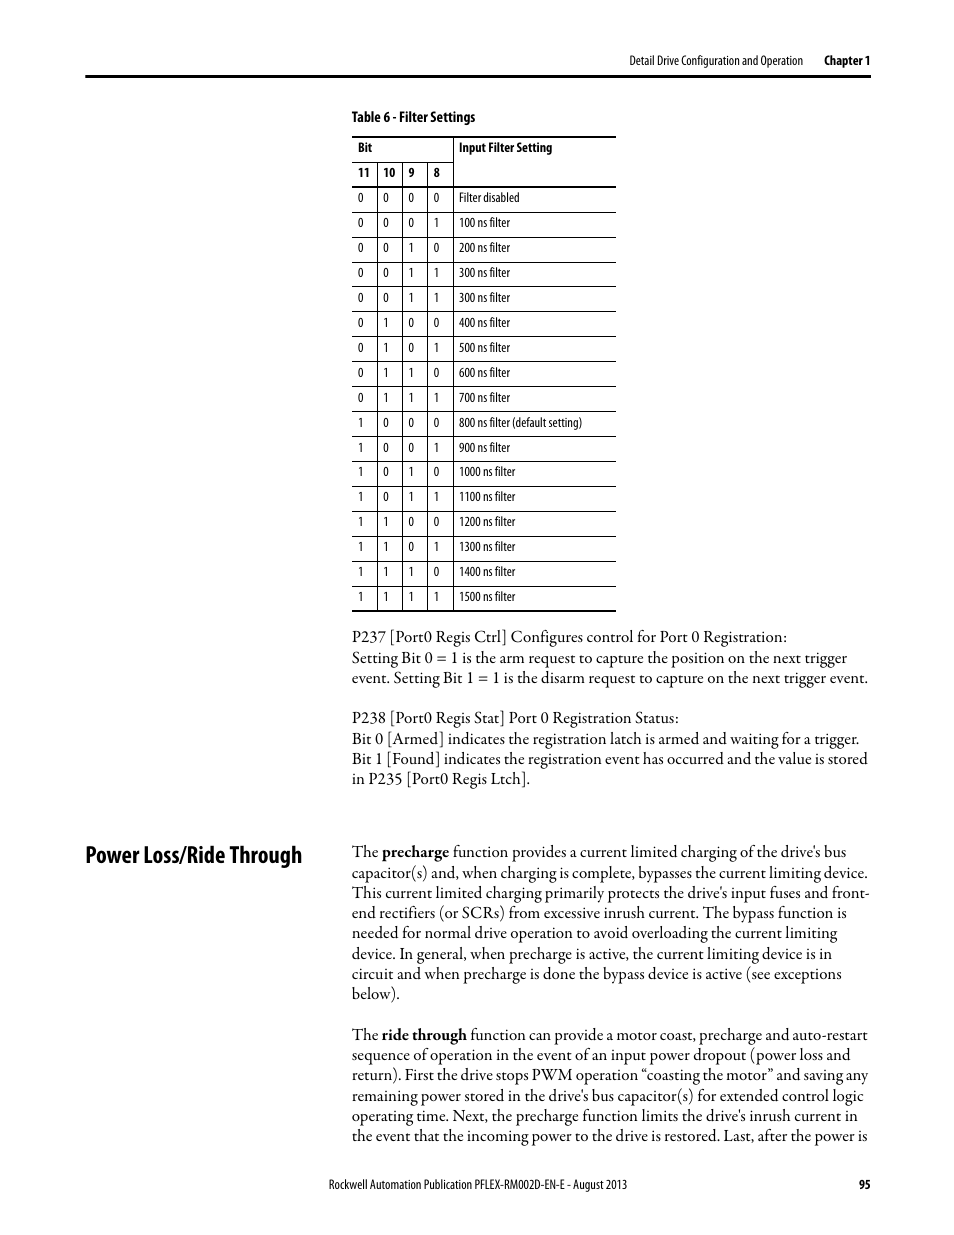 Power loss/ride through | Rockwell Automation 20D PowerFlex 700S with Phase I Control Reference Manual User Manual | Page 95 / 190